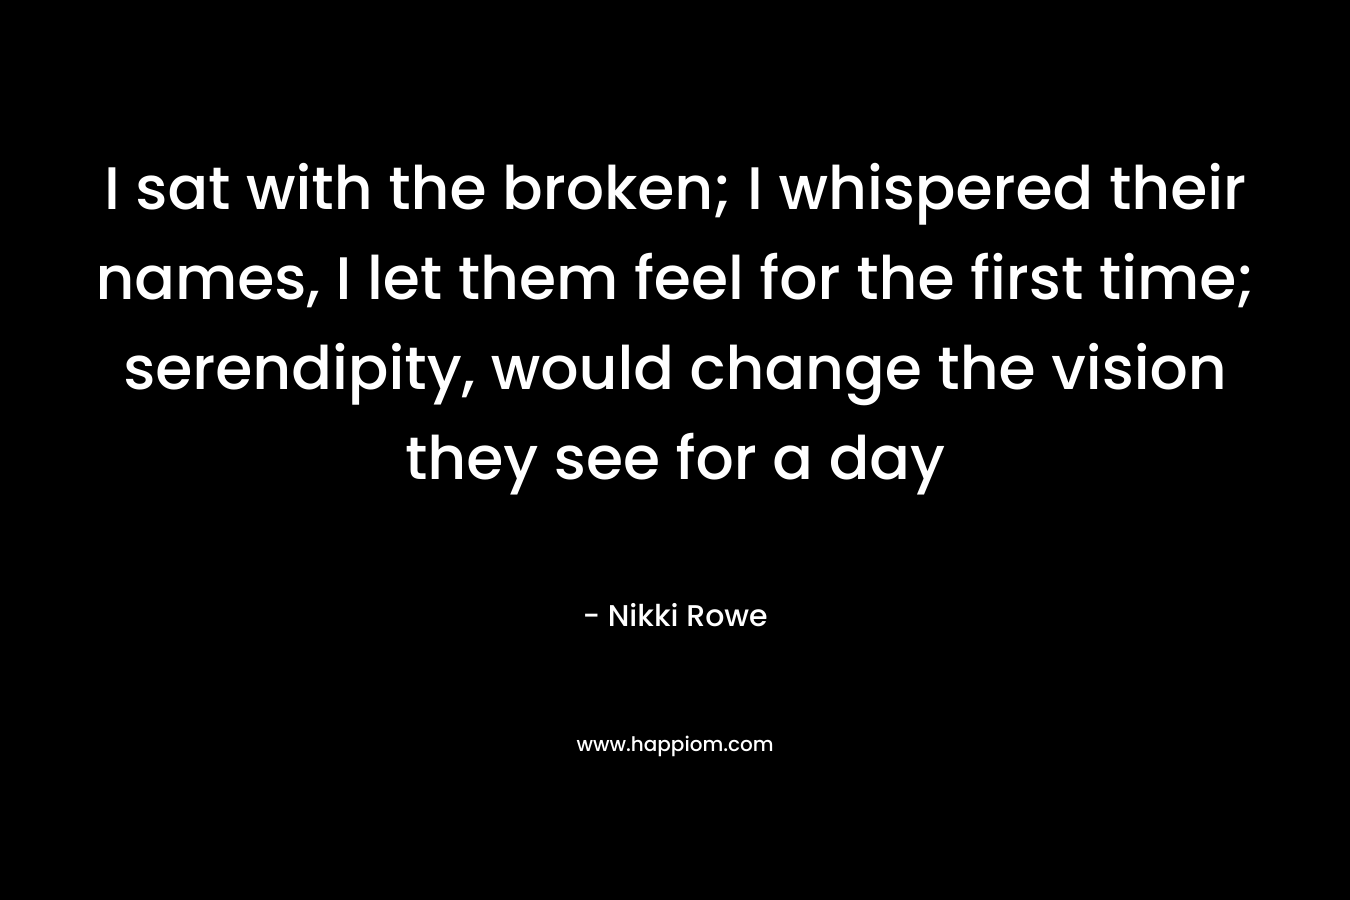 I sat with the broken; I whispered their names, I let them feel for the first time; serendipity, would change the vision they see for a day – Nikki Rowe